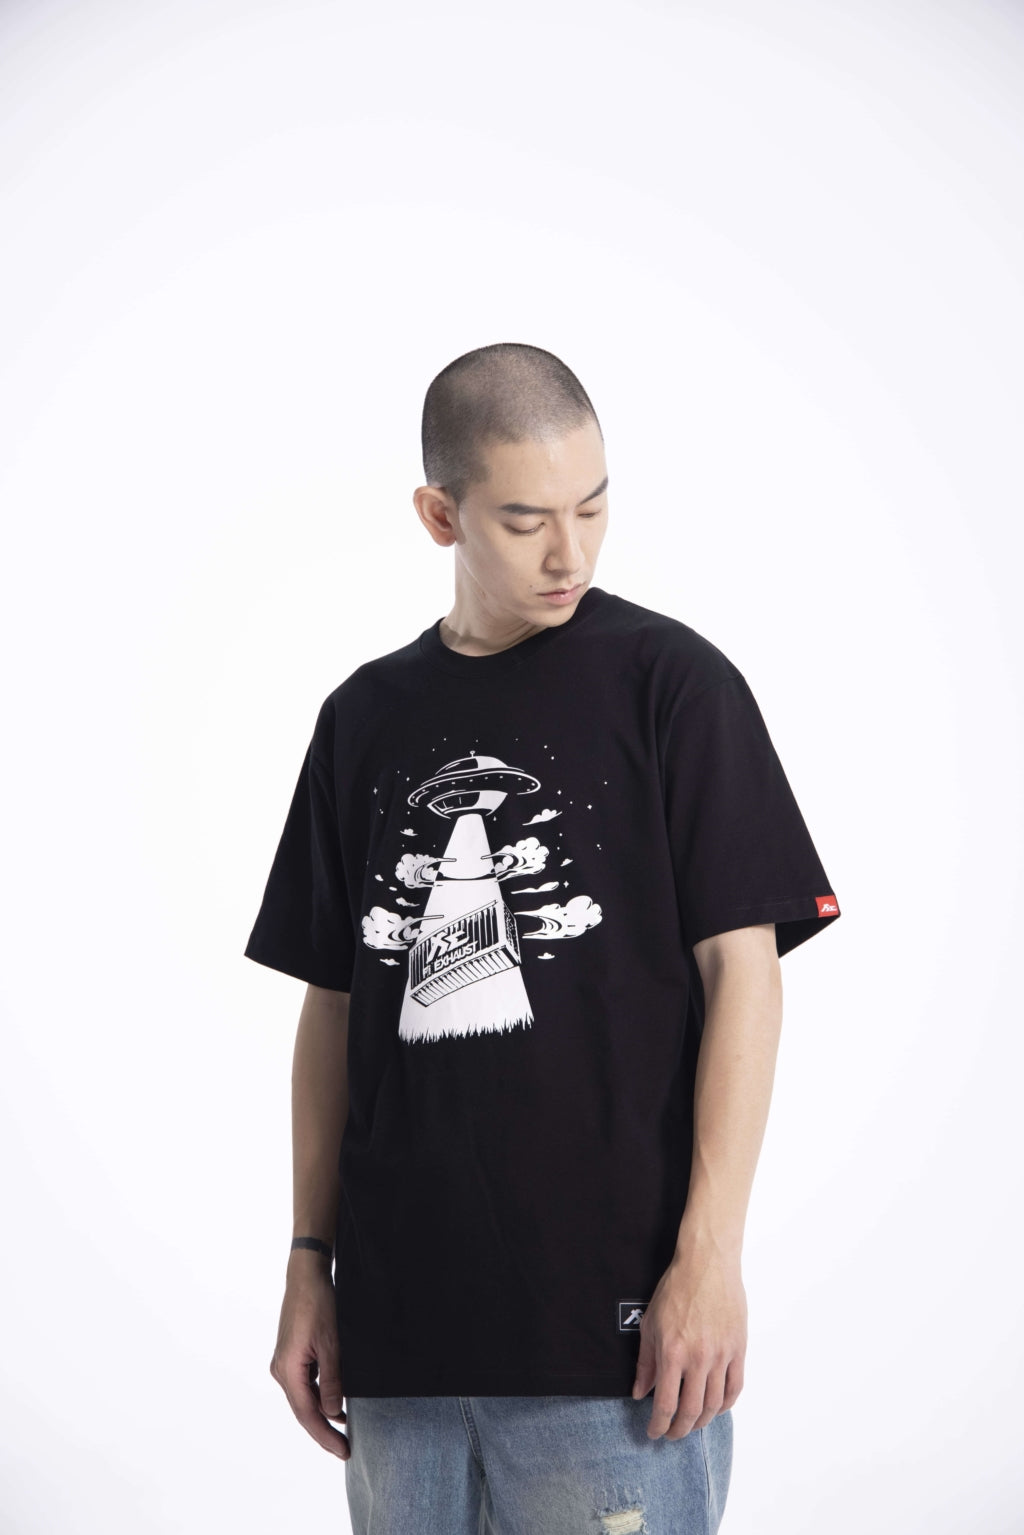 "Outer Space" Heavyweight Crew Neck T-Shirt [Limited Ed.]